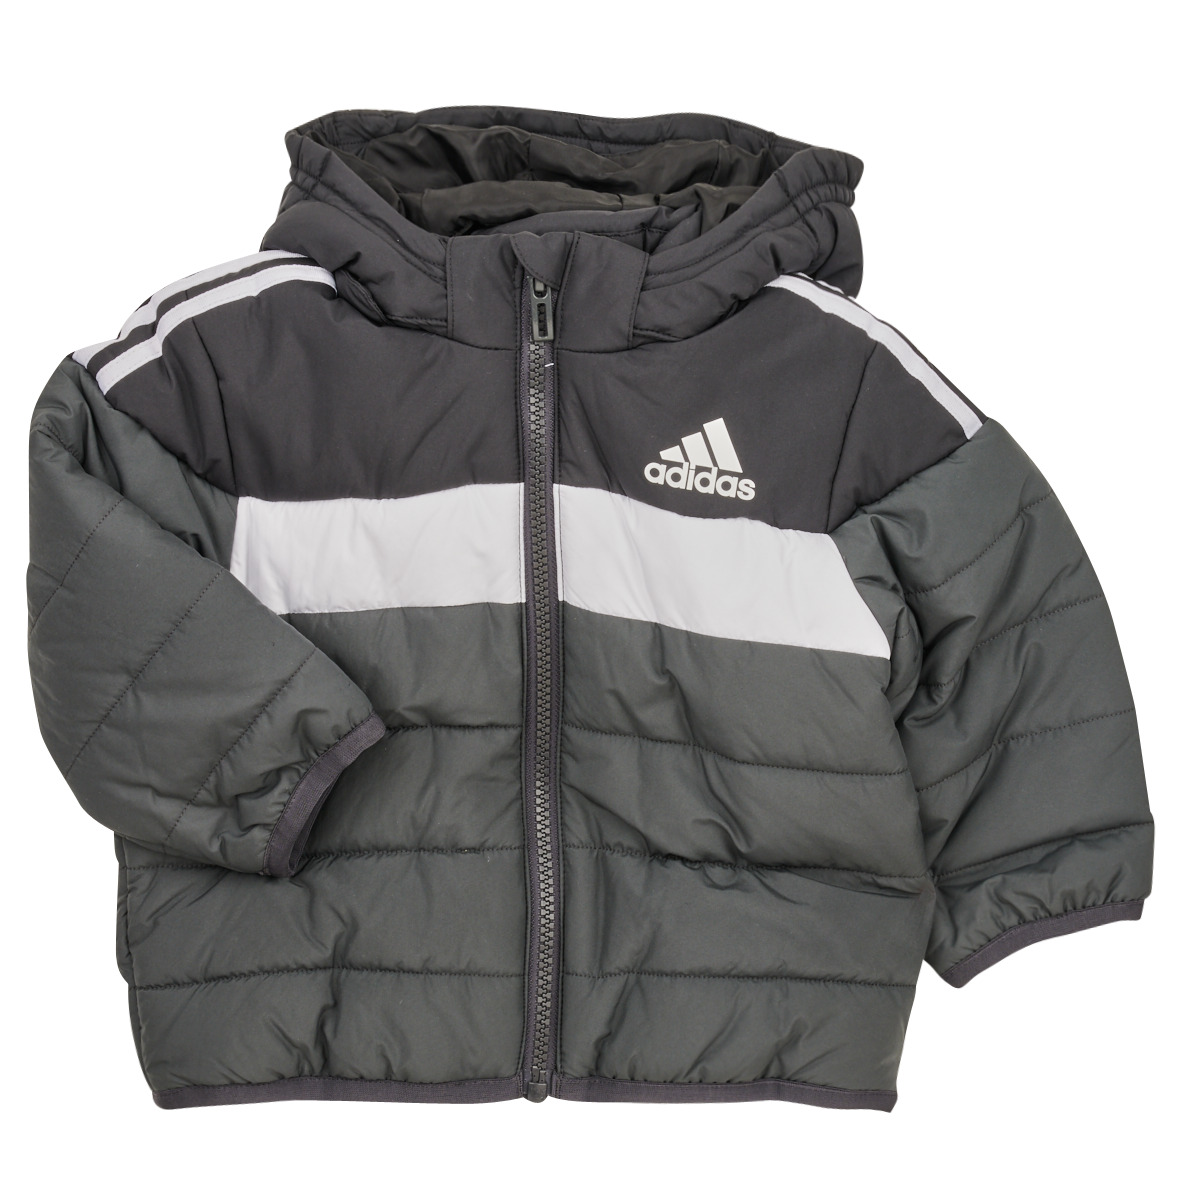 - delivery Spartoo Duffel IN | NET PAD Clothing F Sportswear Child - Free Adidas ! coats JKT Black